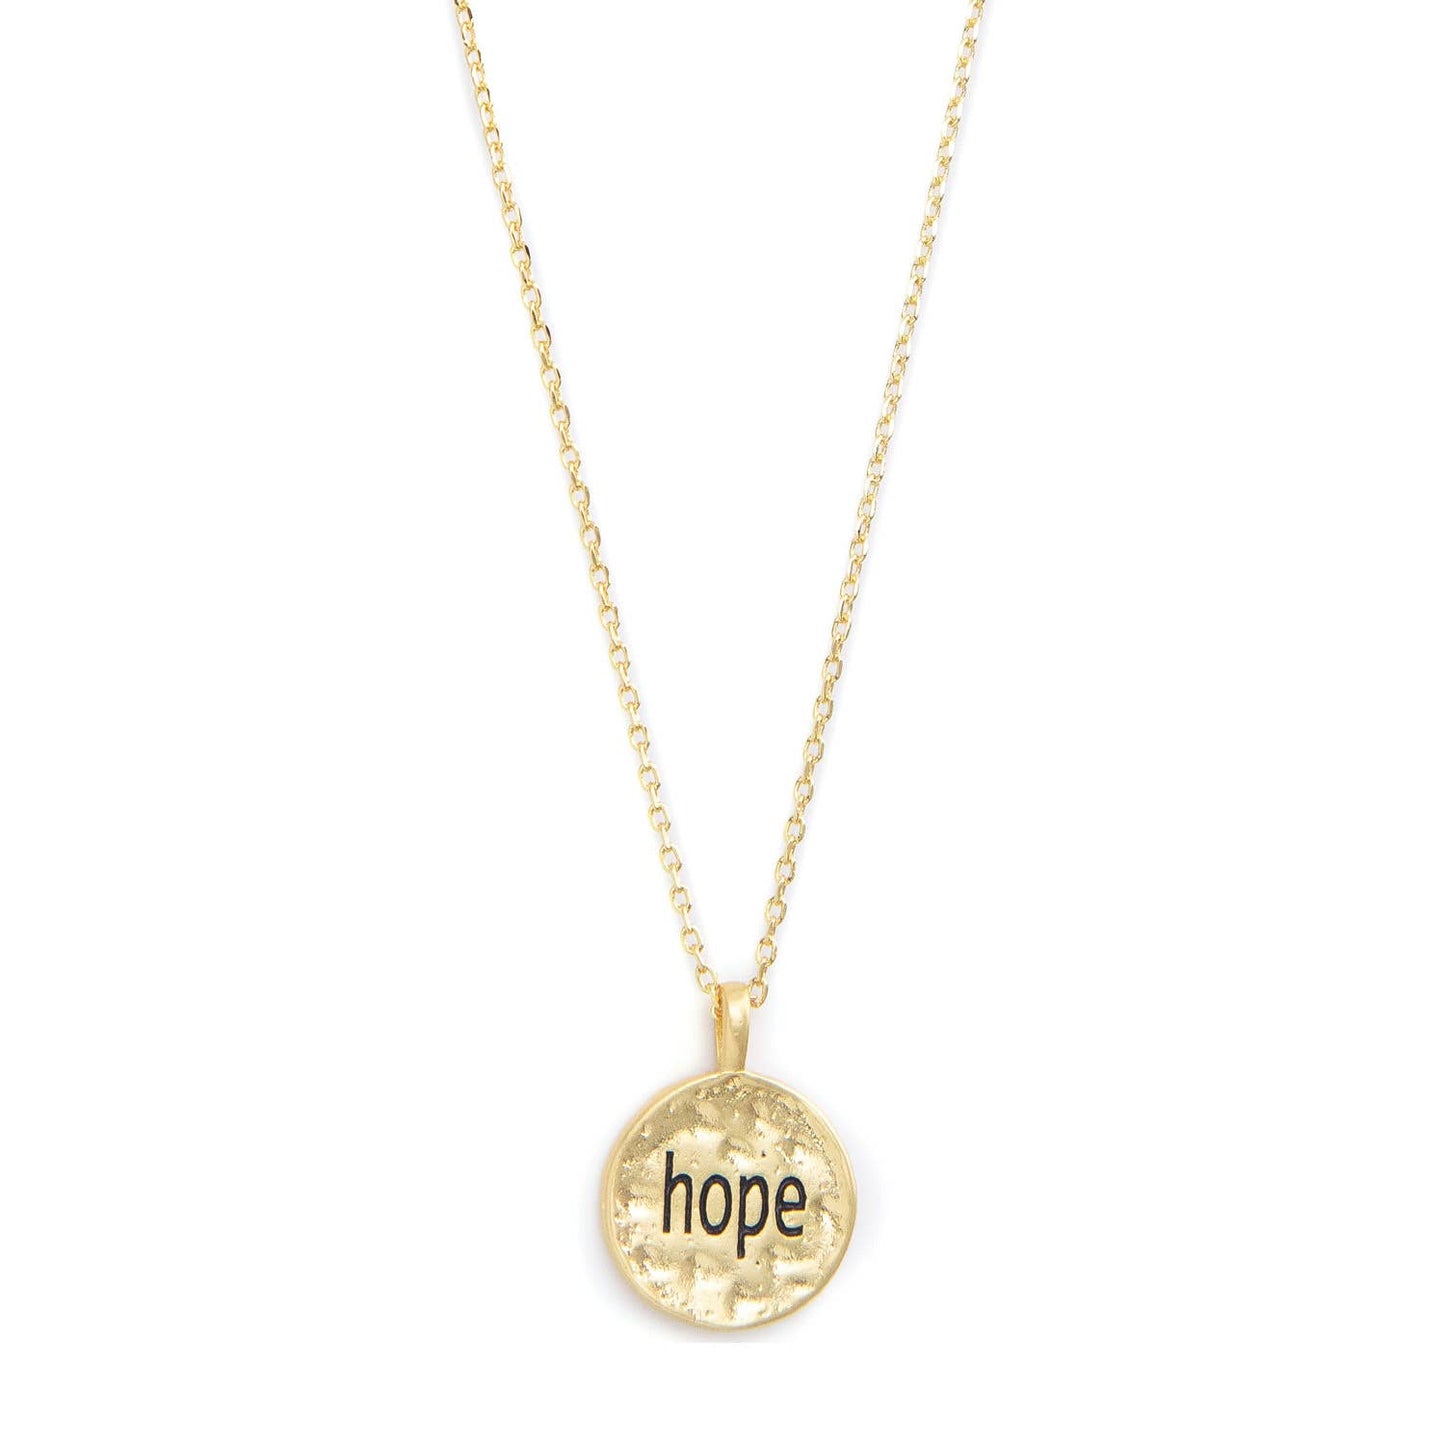 Hope Small Pendant Necklace, SALE